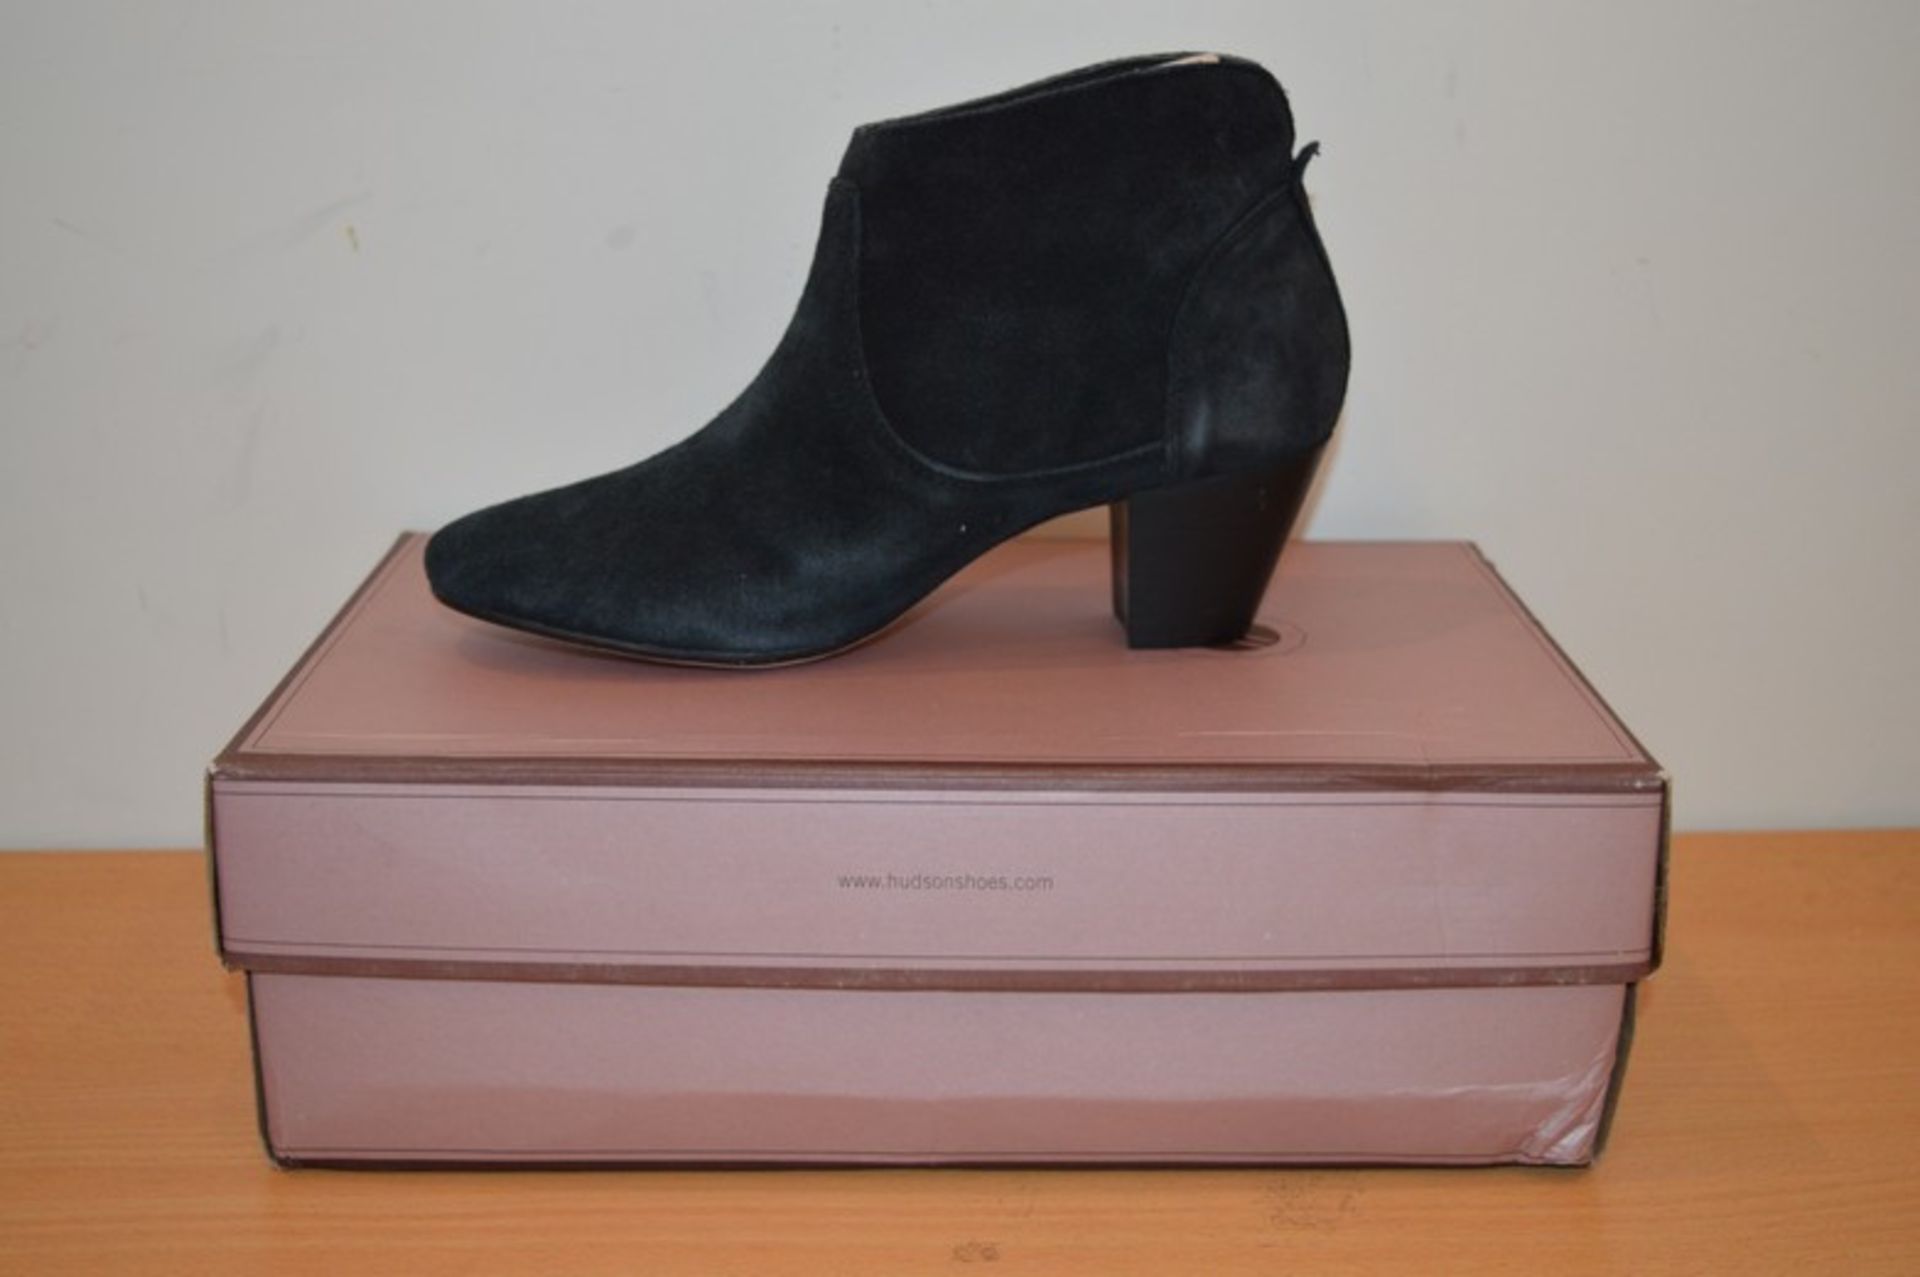 BOXED BRAND NEW HUDSON BLACK LADIES CALF BOOTS IN UK SIZE 6.5 RRP £160 (DSCLIP)